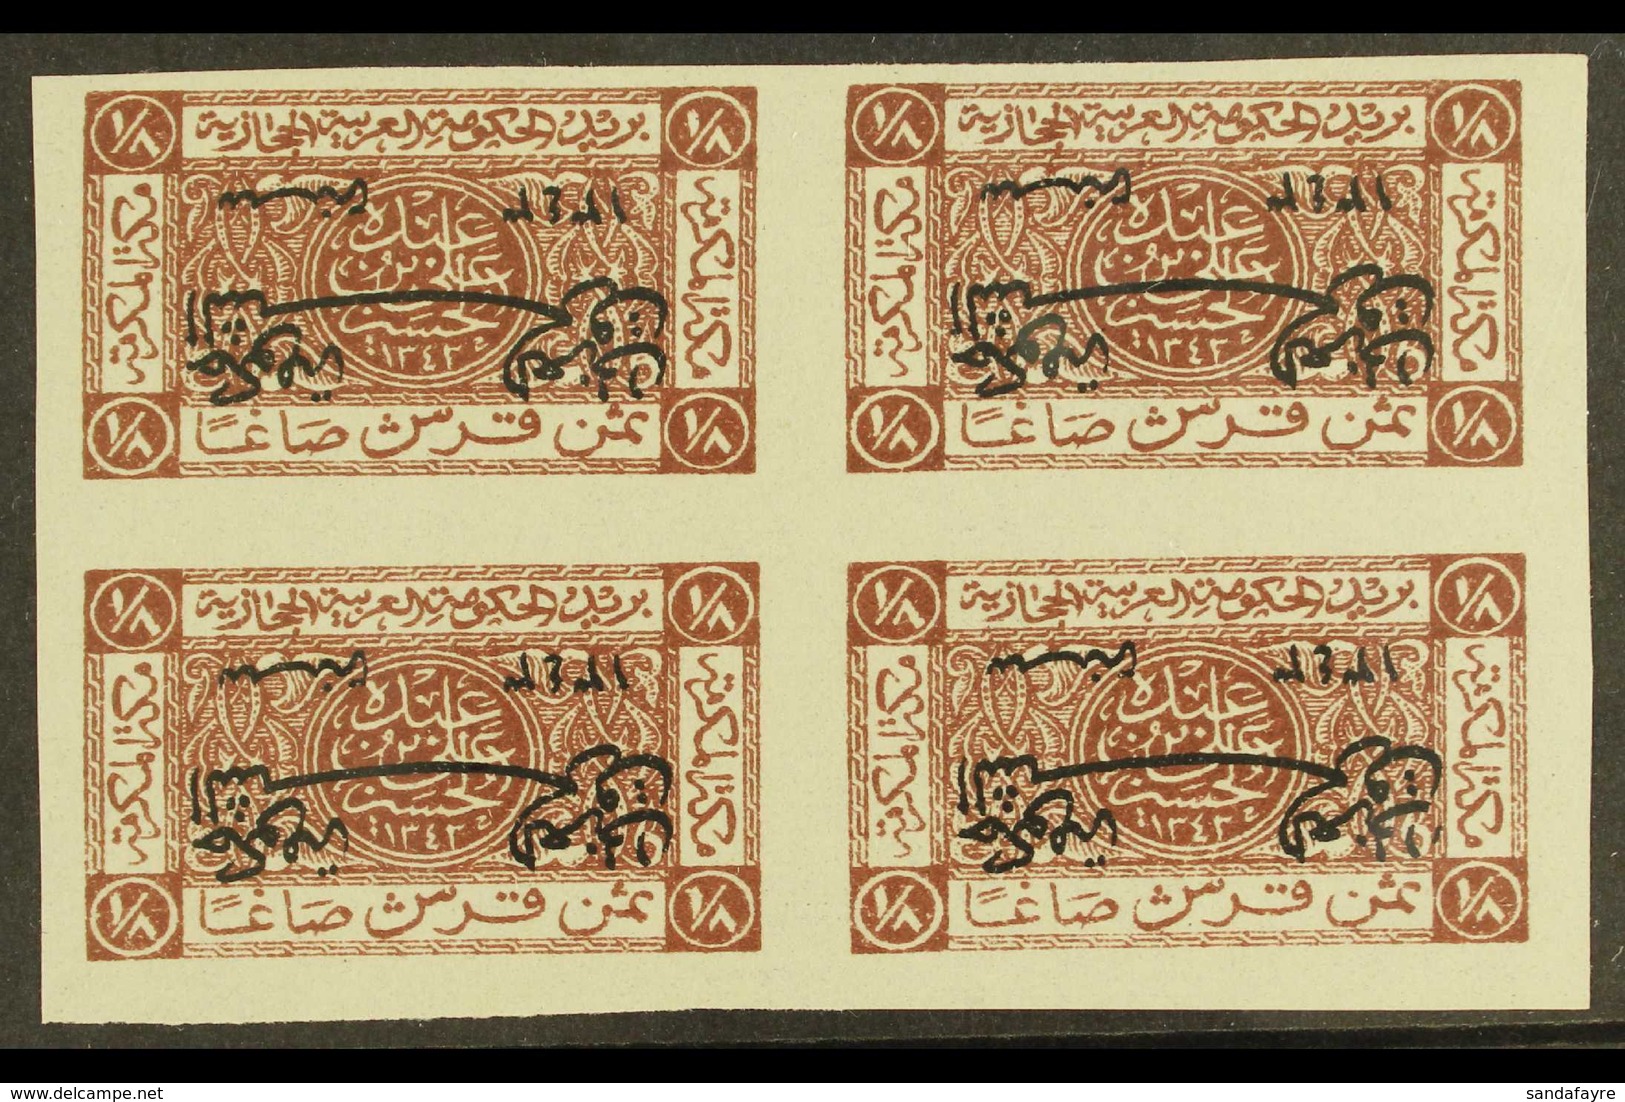 1925 1/8p Chocolate With Overprint Inverted (as SG 135b), But In A Never Hinged Mint IMPERF Block Of Four.  For More Ima - Jordanien